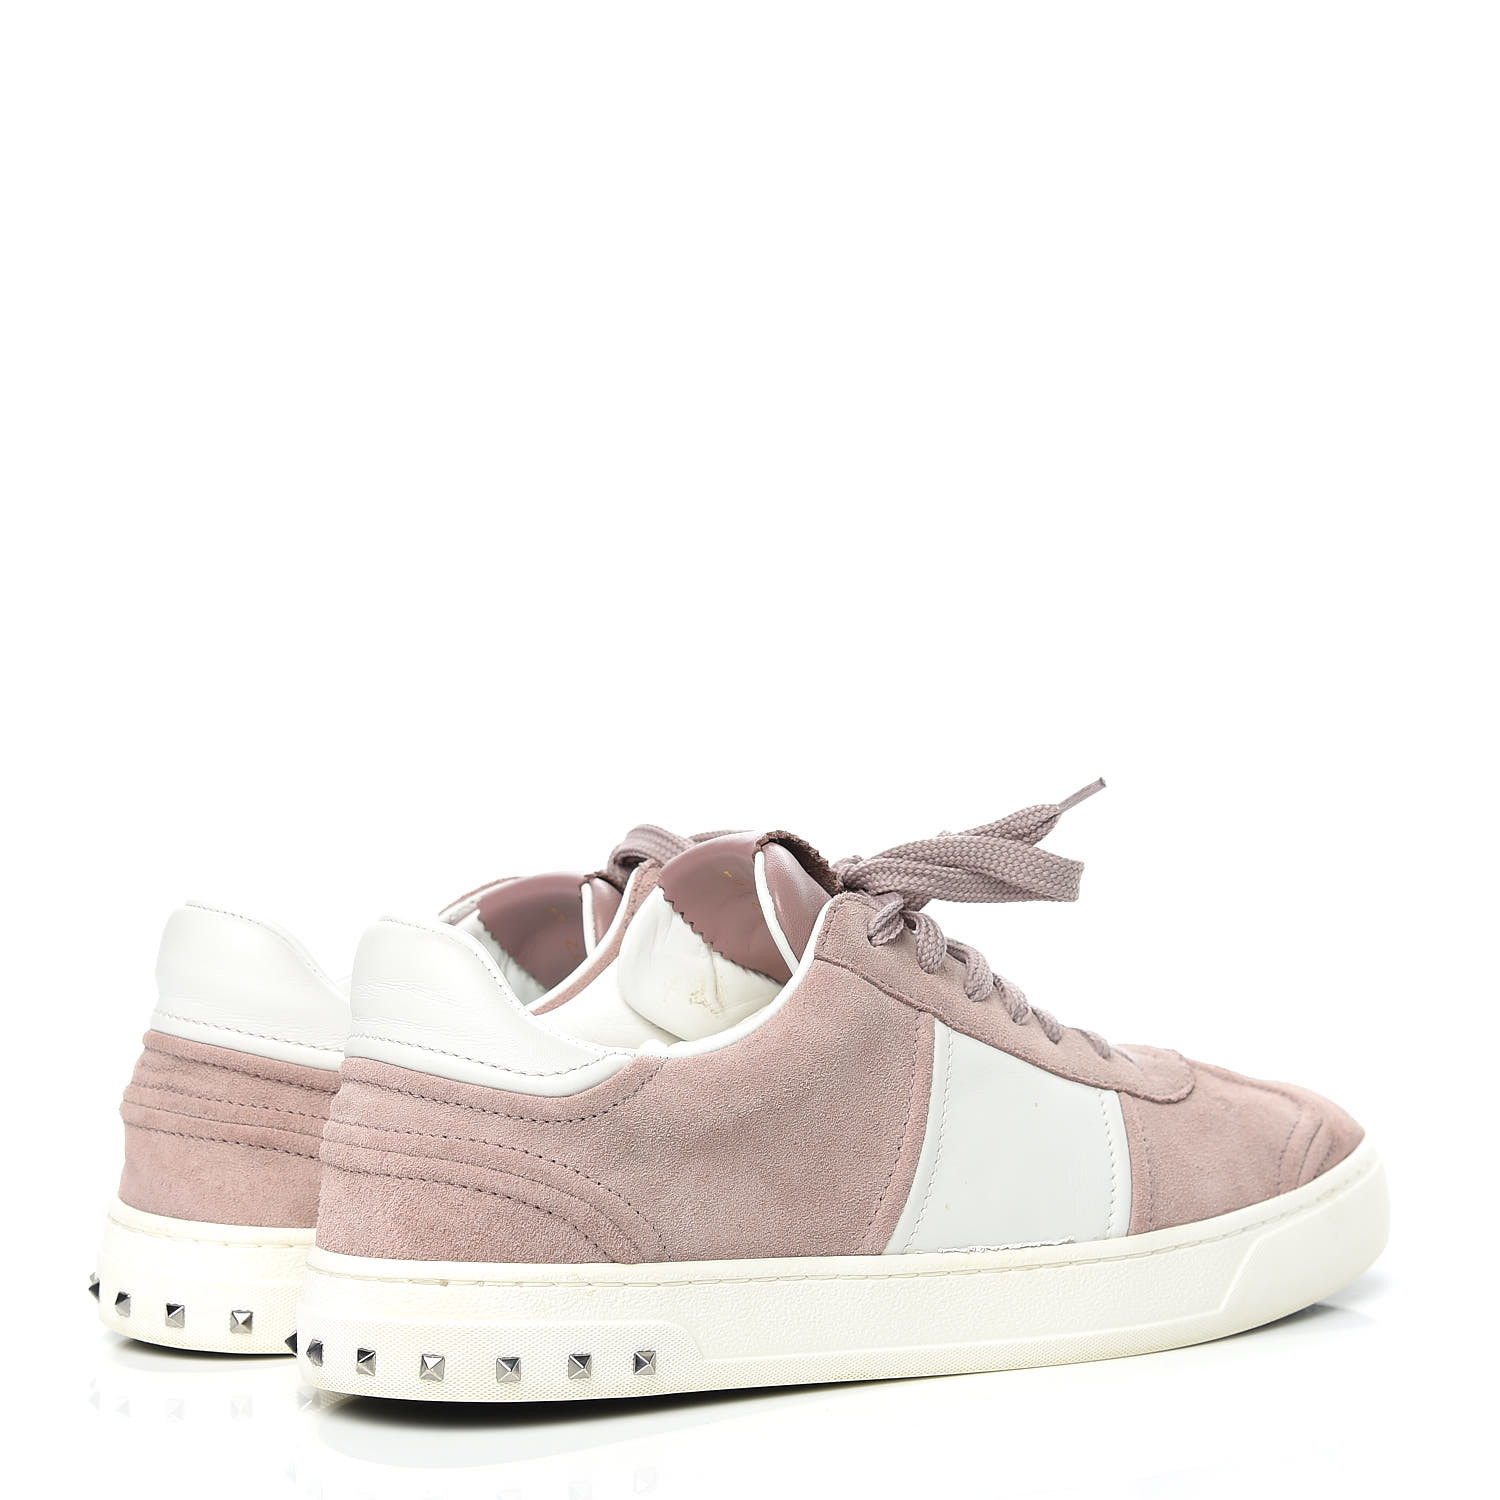 VALENTINO Suede Flycrew Sneakers 44 Pink White 466237 | FASHIONPHILE